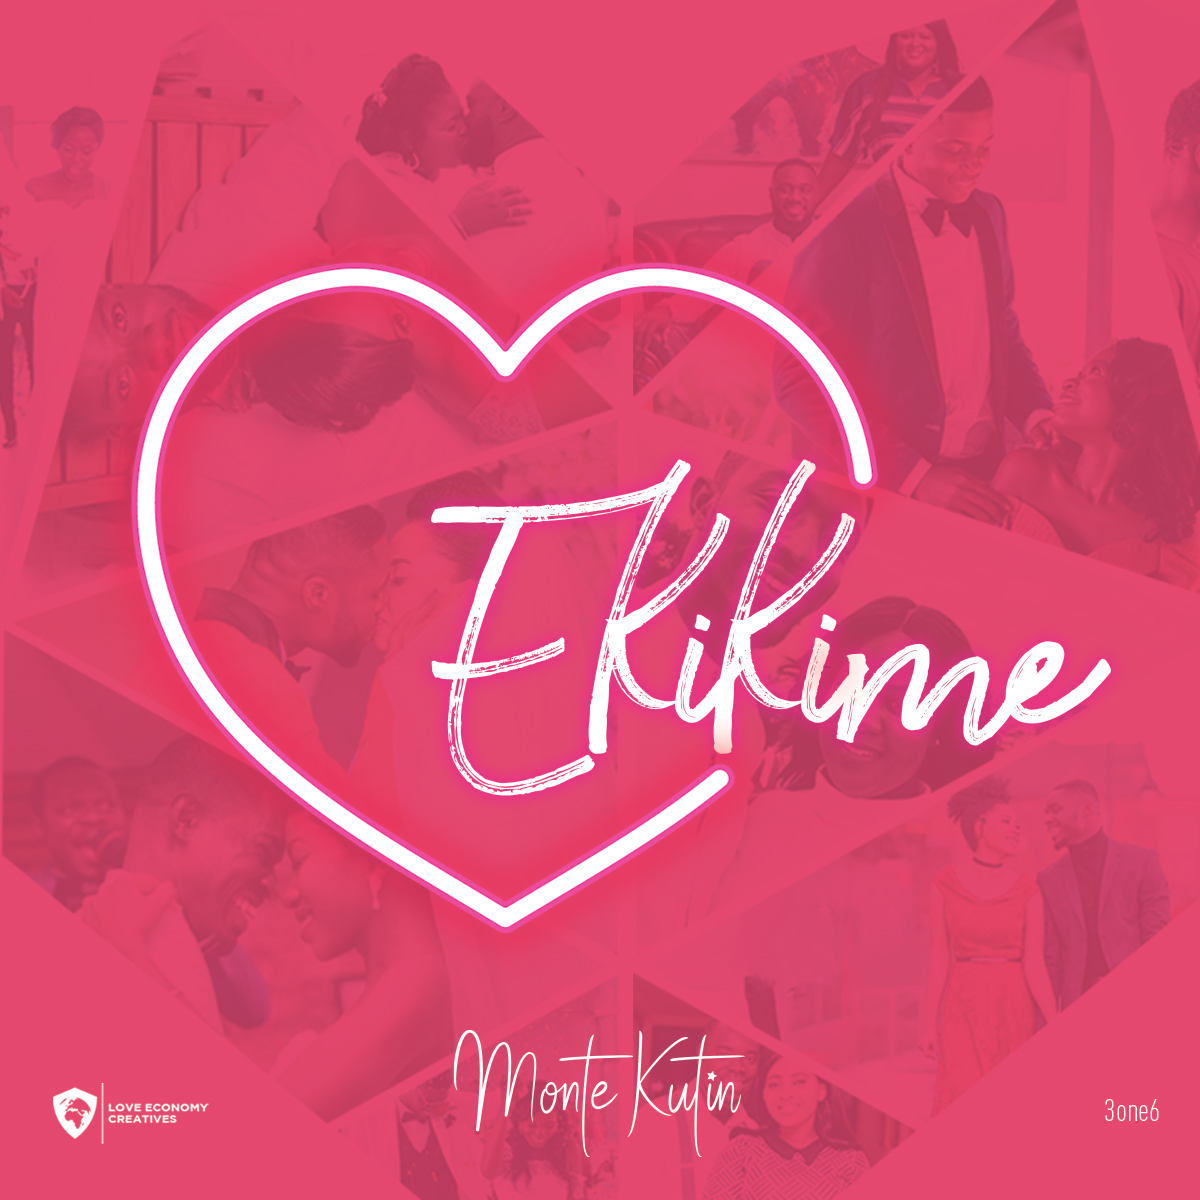 Monte Kutin’s Ekiki Me is for this perfect love